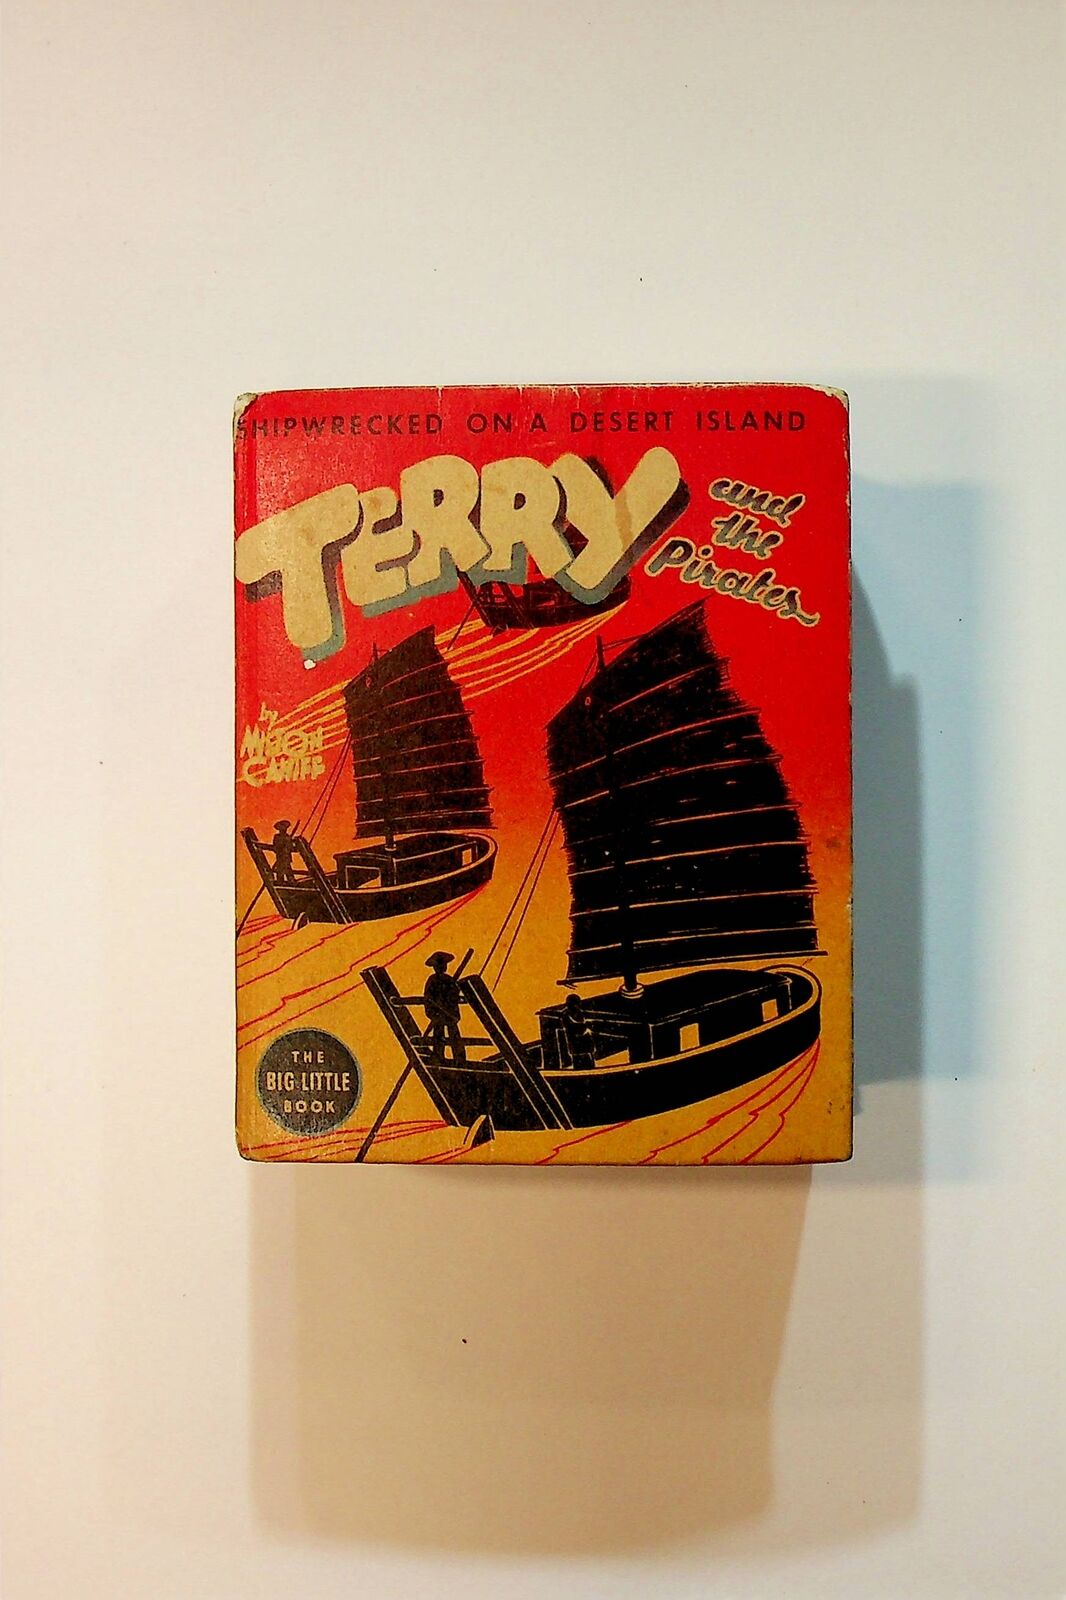 Terry and the Pirates Shipwrecked on a Desert Island #1412 FN 1938